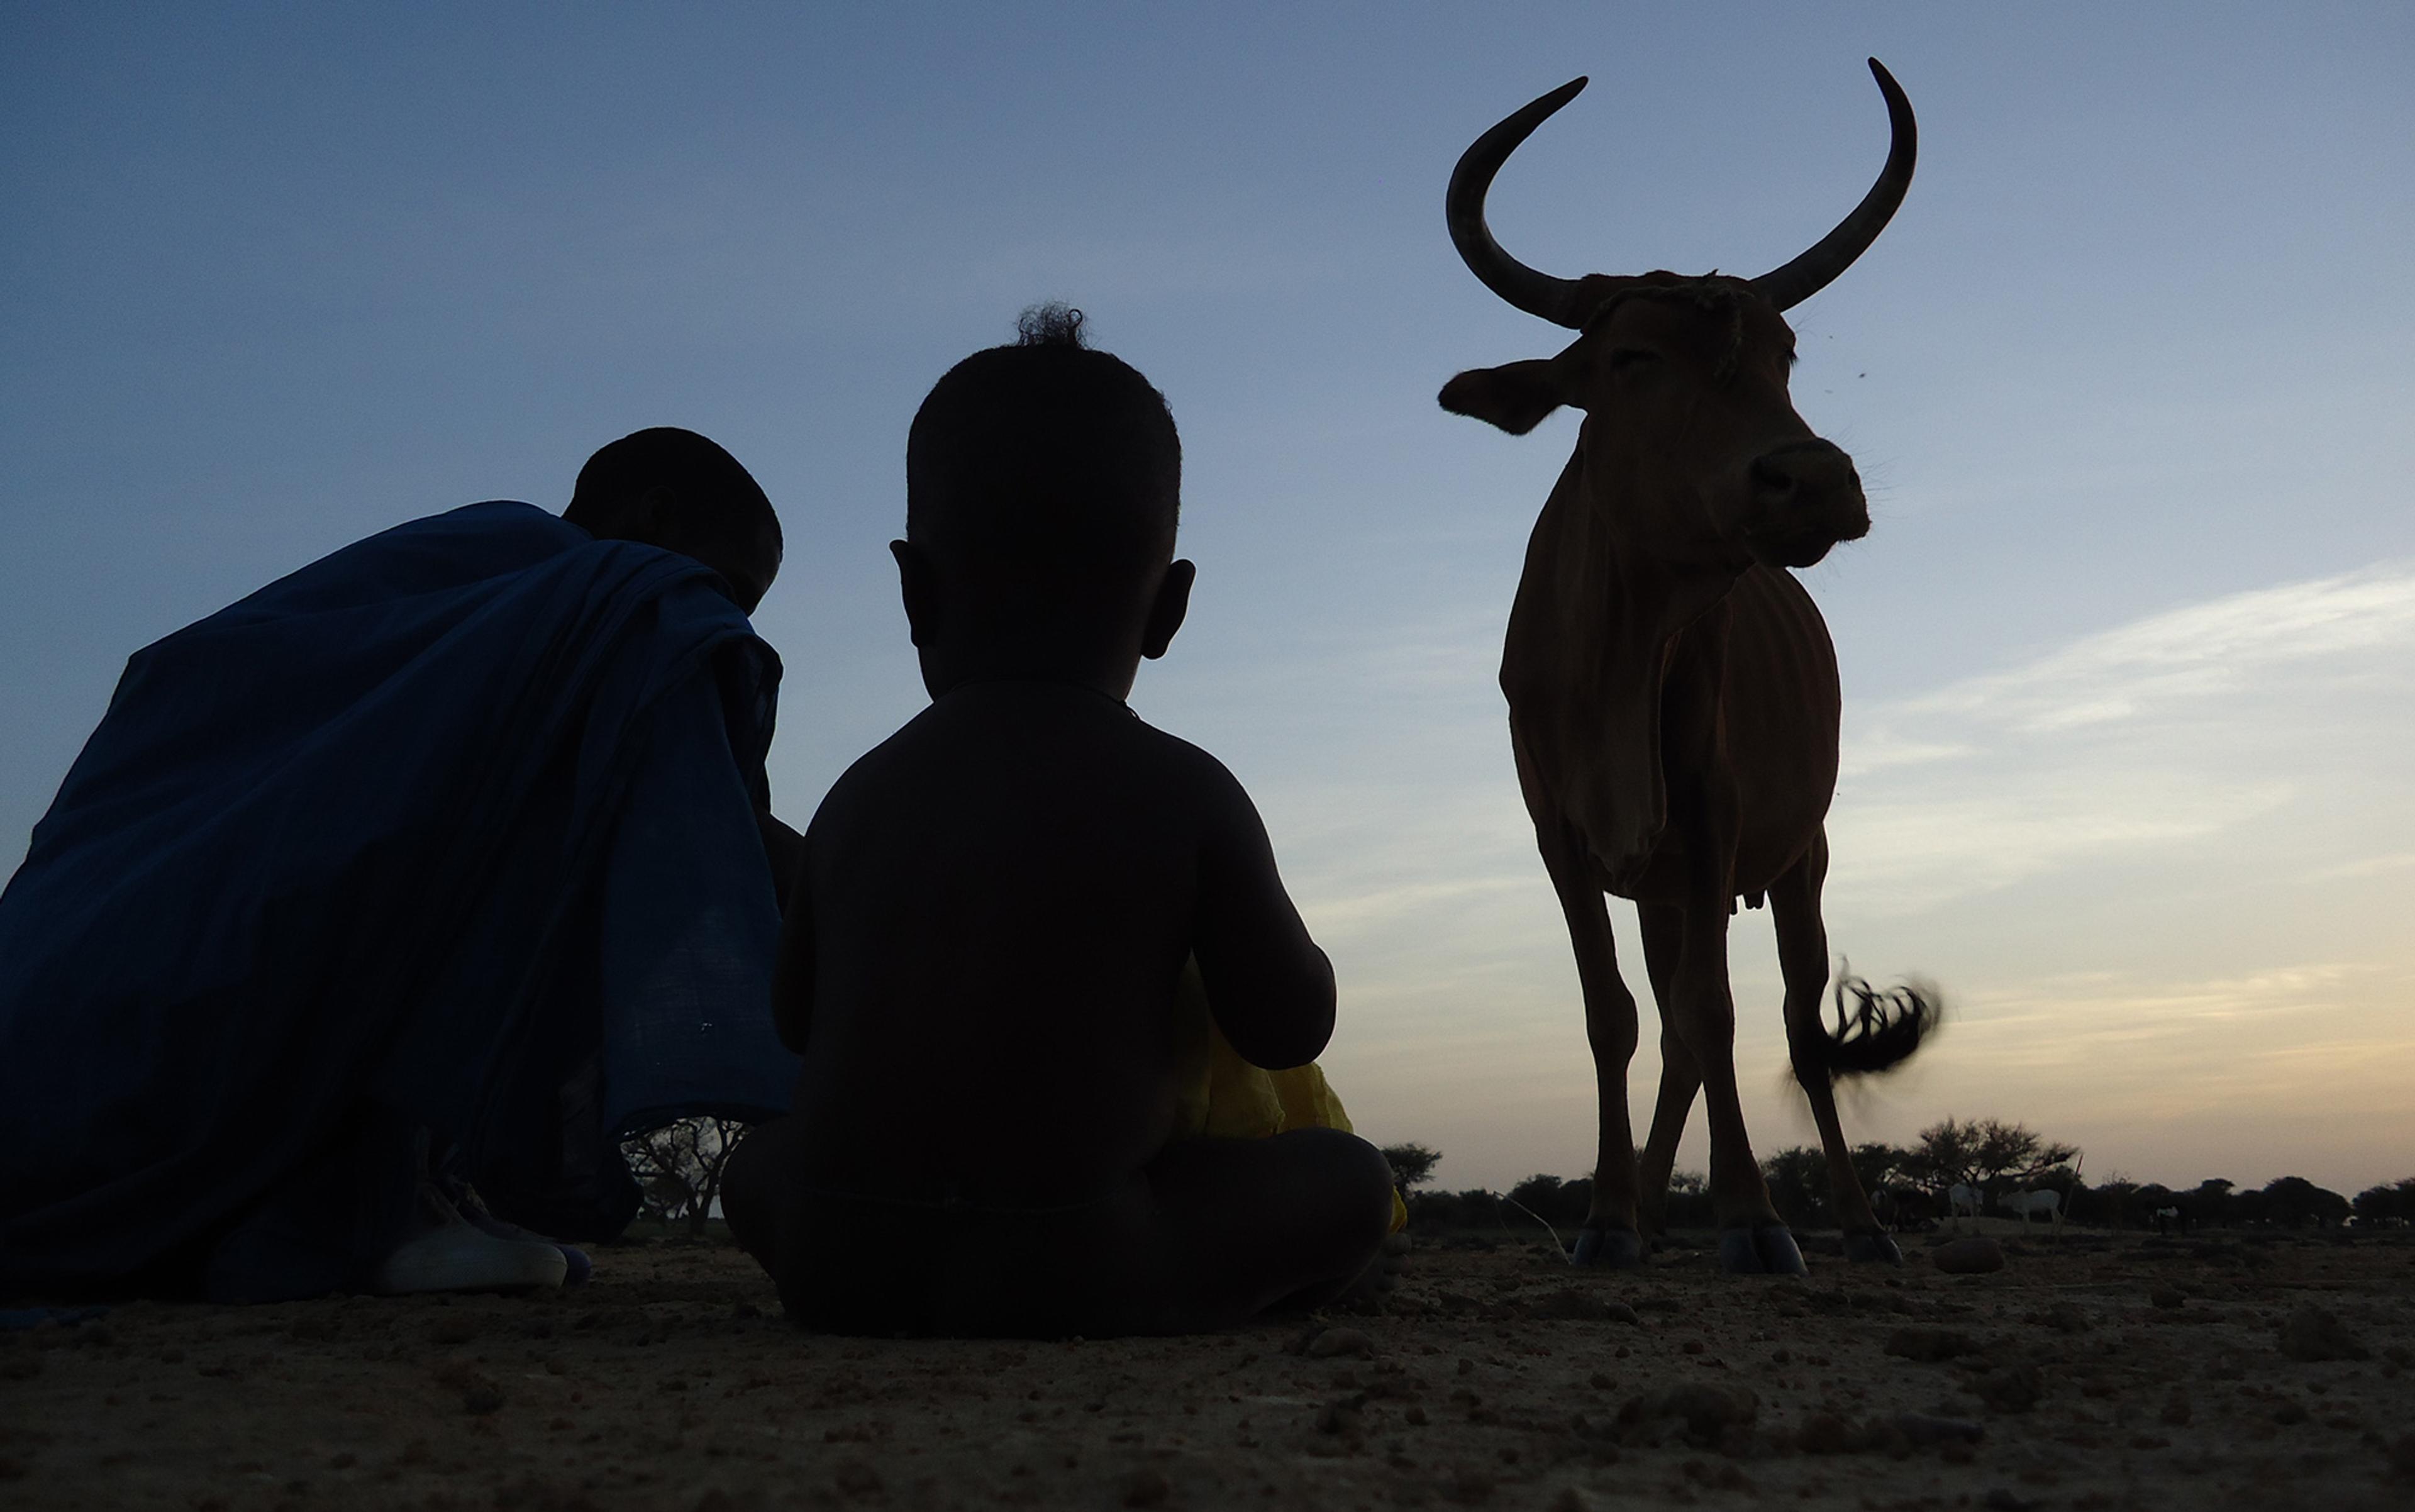 Silhouette of a man, a child, and a cow with large horns sitting on the ground at sunset.